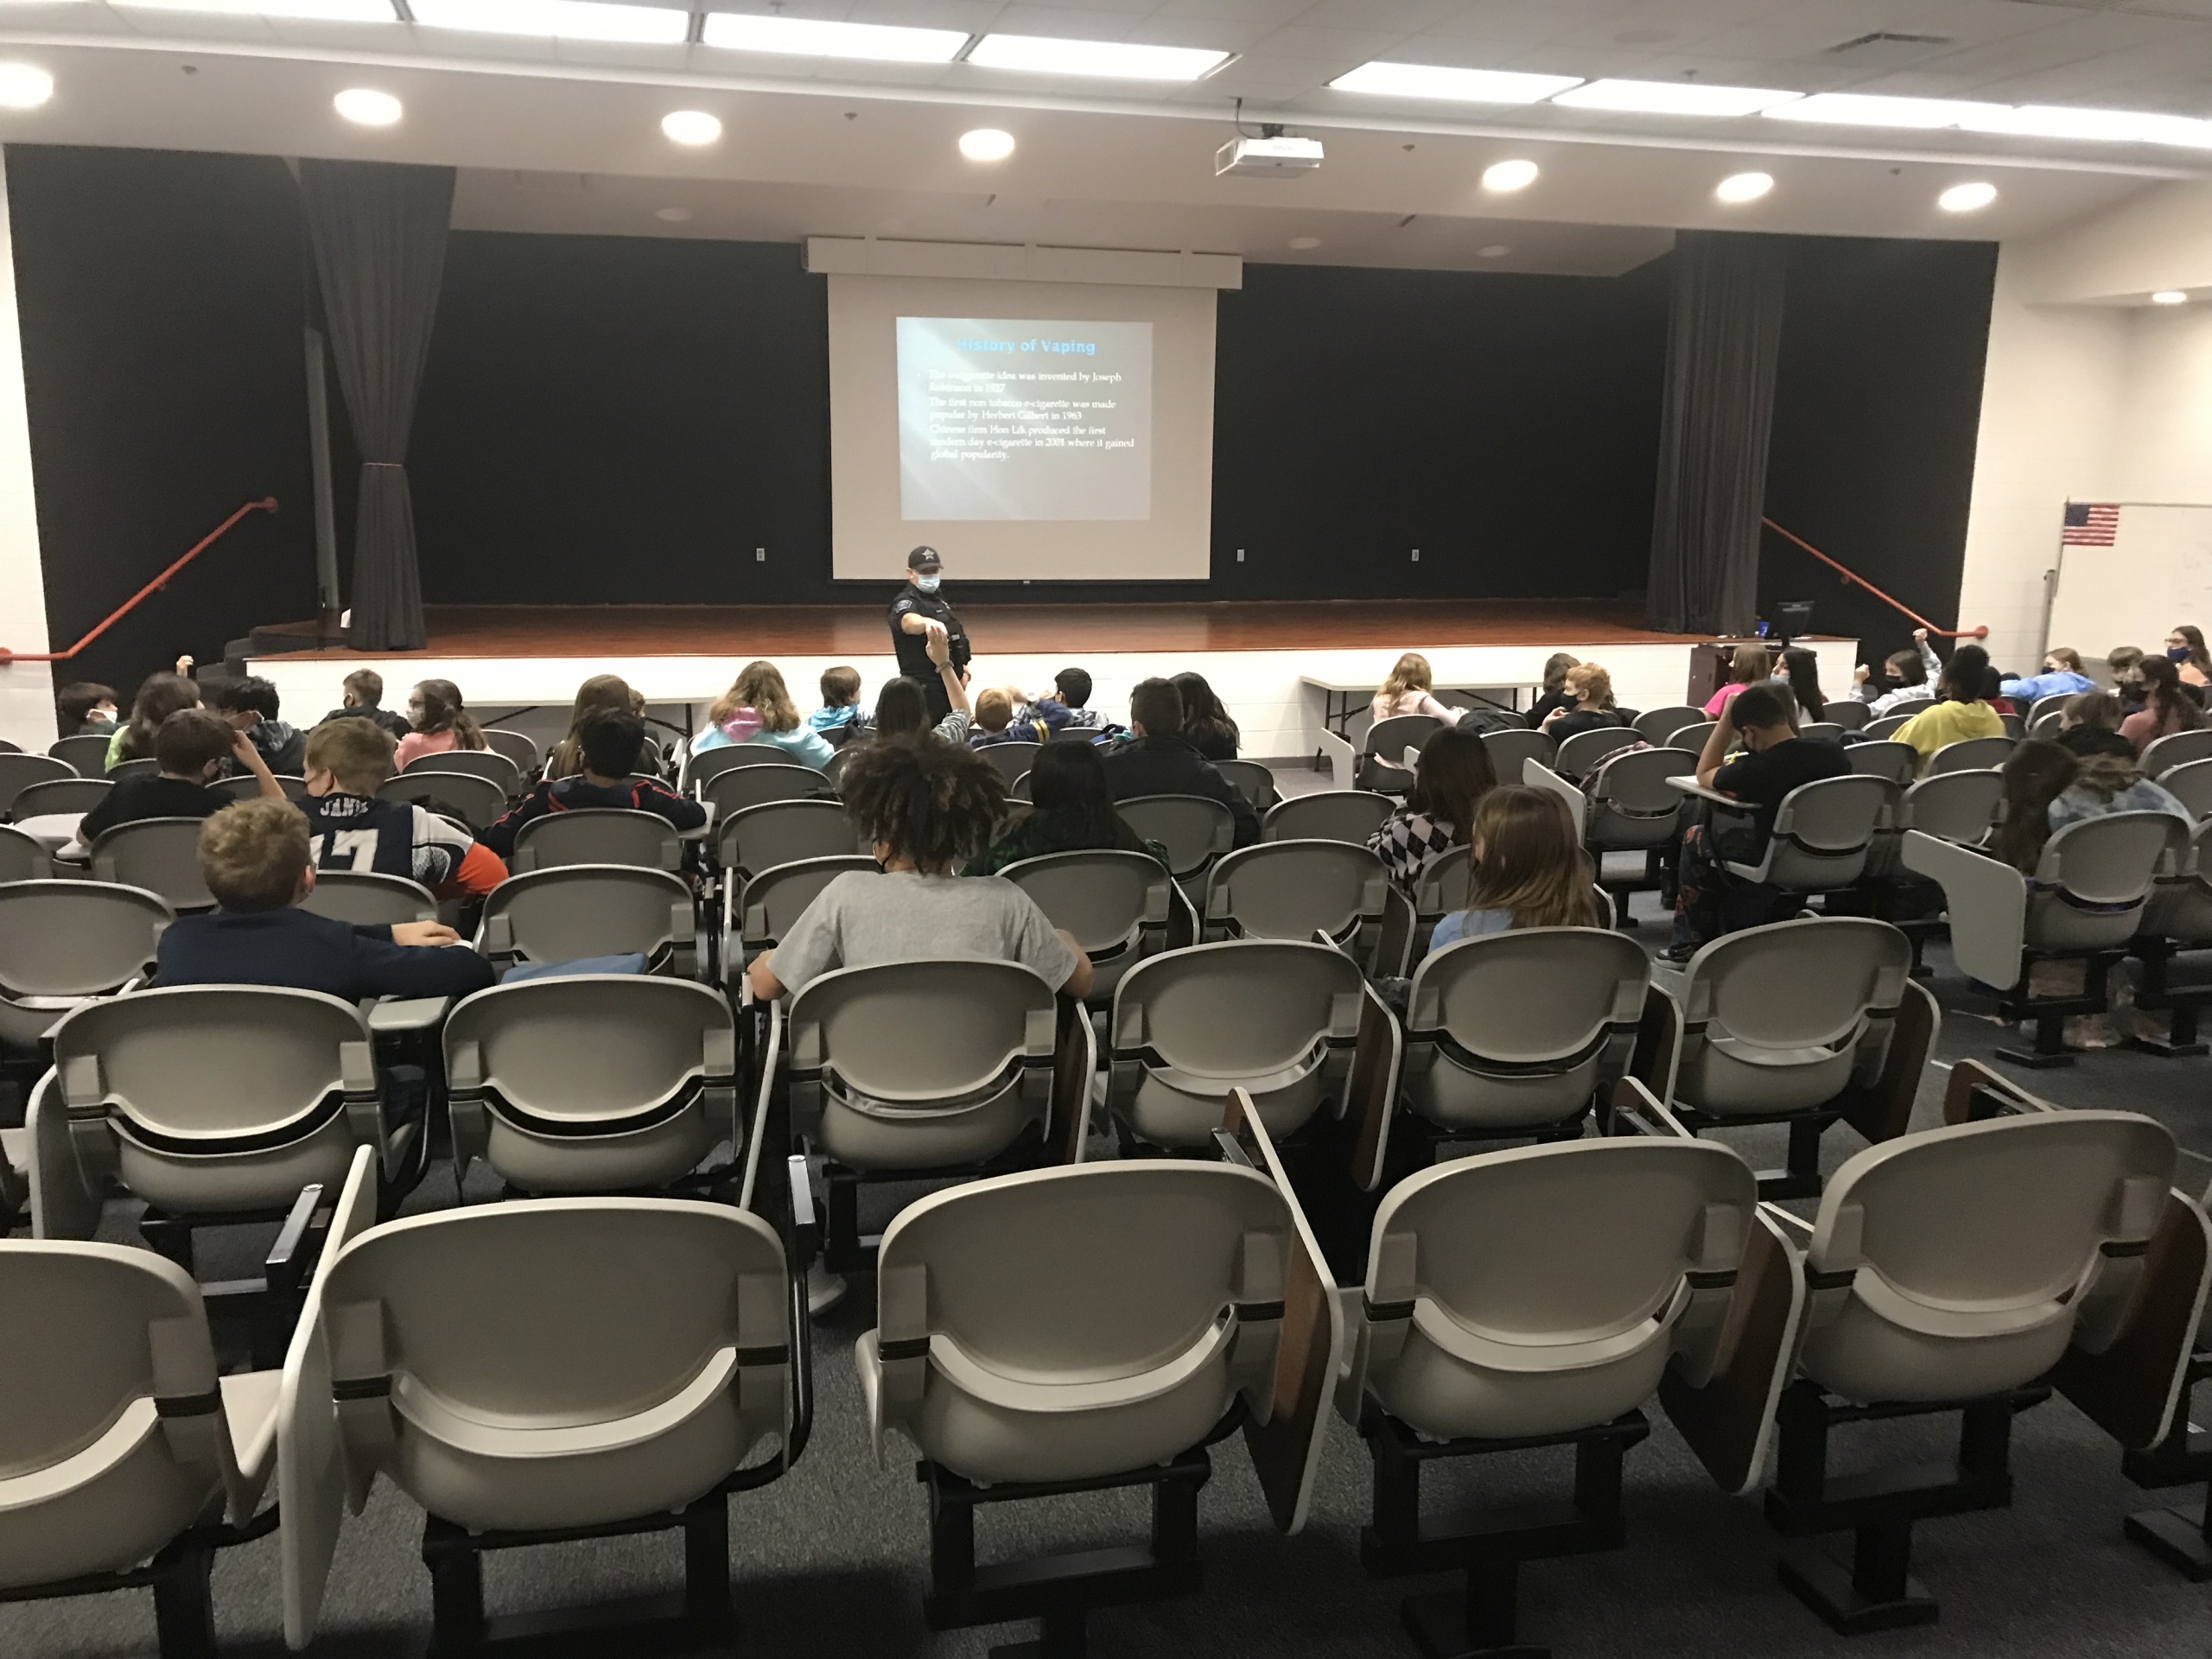 Officer Stamate does a presentation to CMS students on the dangers of vaping as well as social media concerns. Thanks Officer Nick!